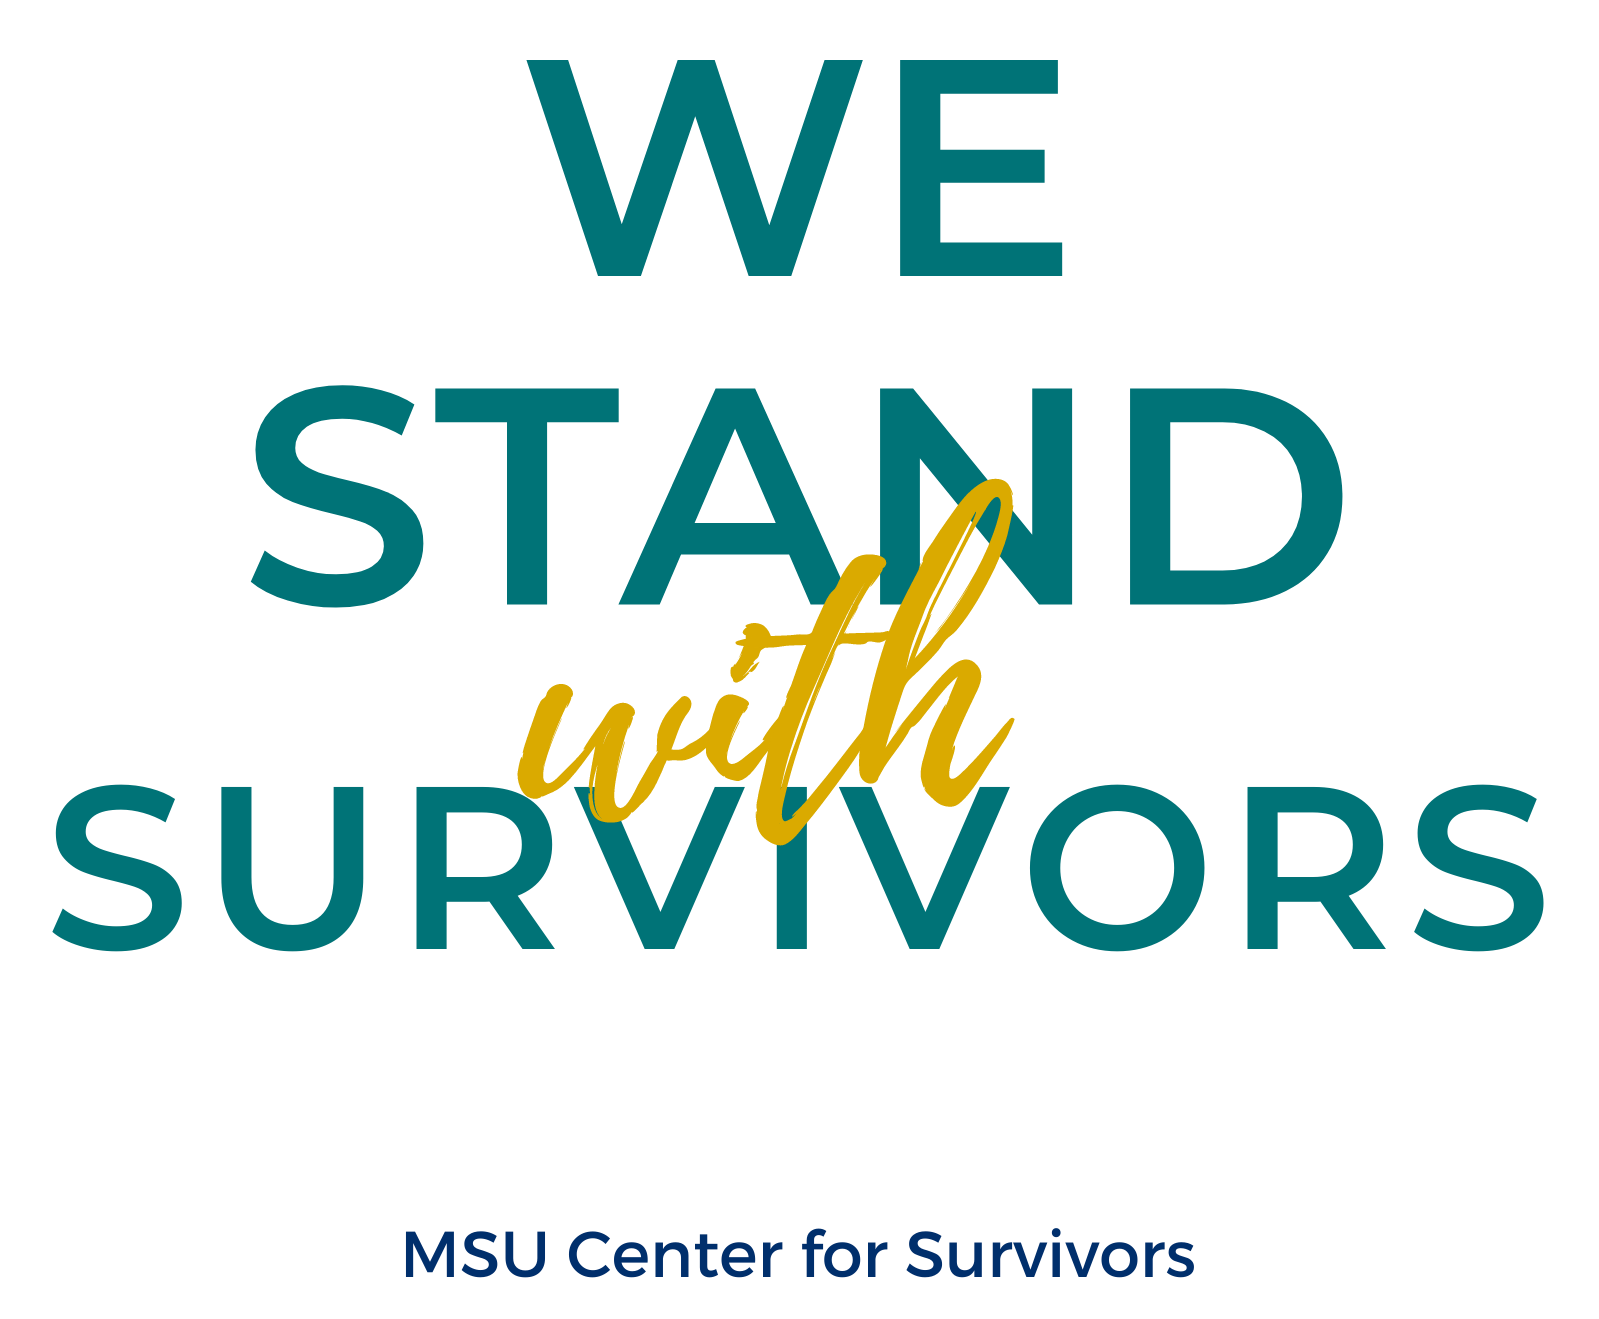 We stand with survivors